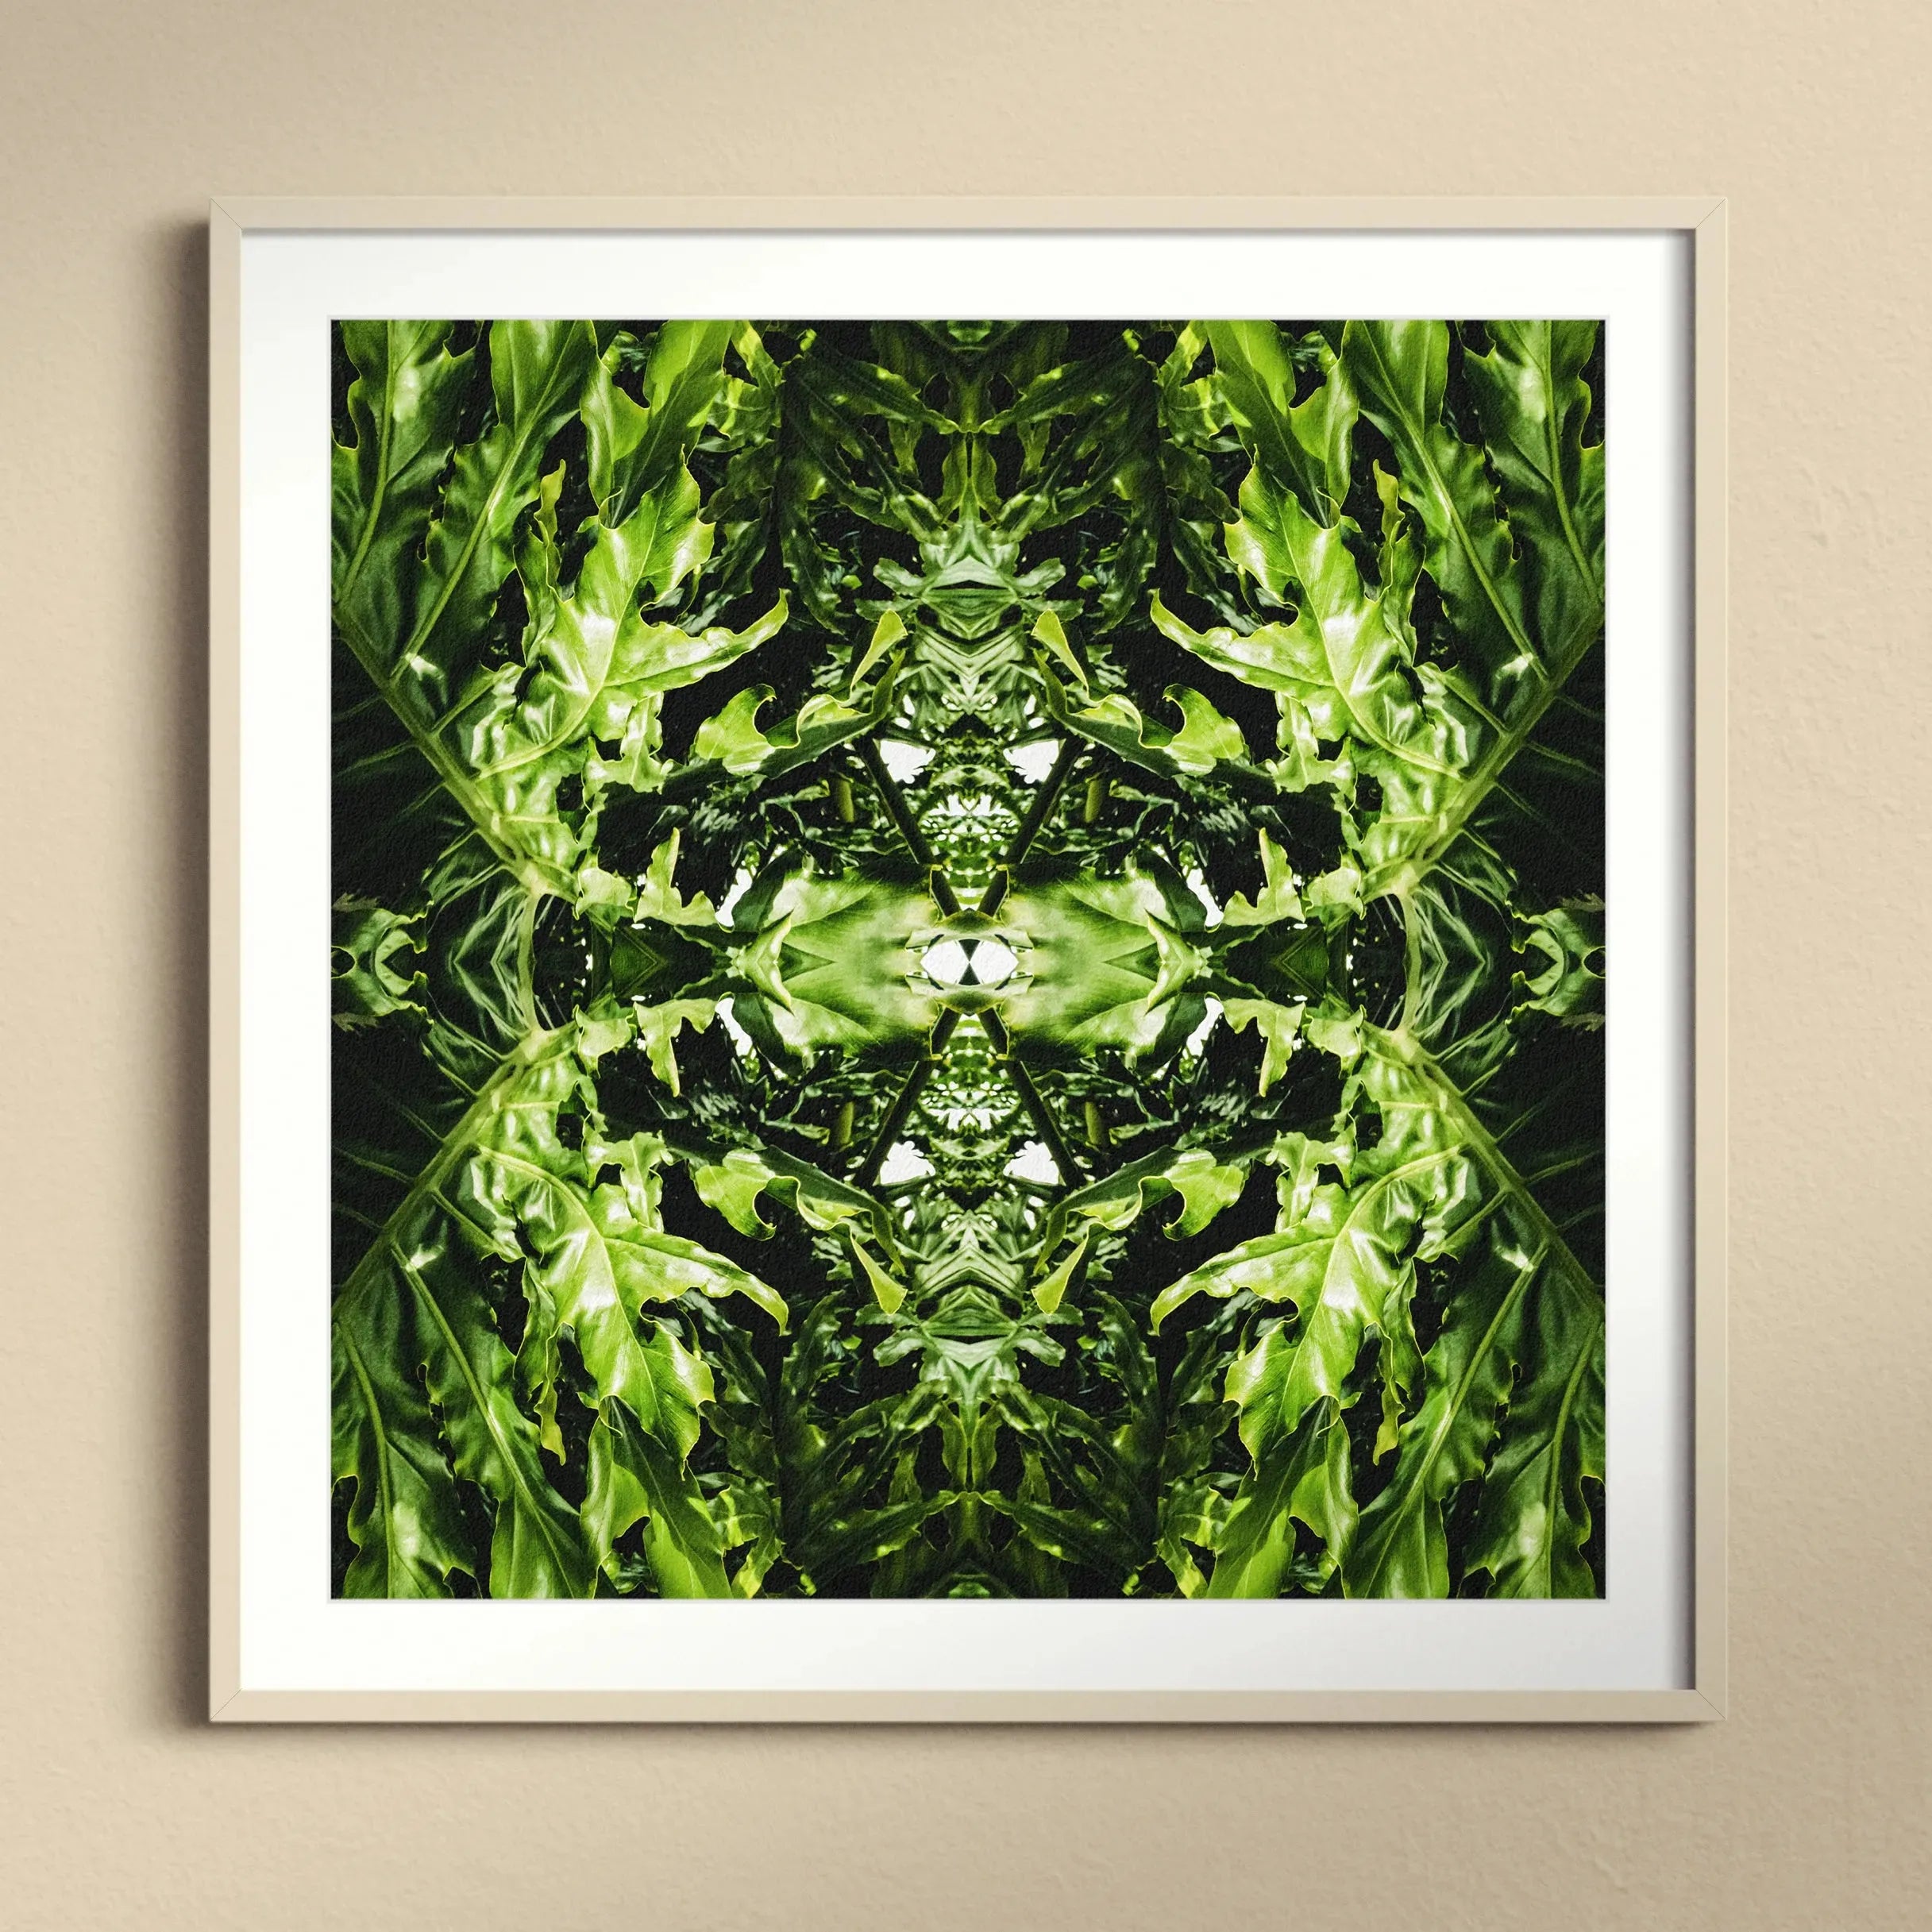 Reach Out Framed & Mounted Print - Posters Prints & Visual Artwork - Aesthetic Art